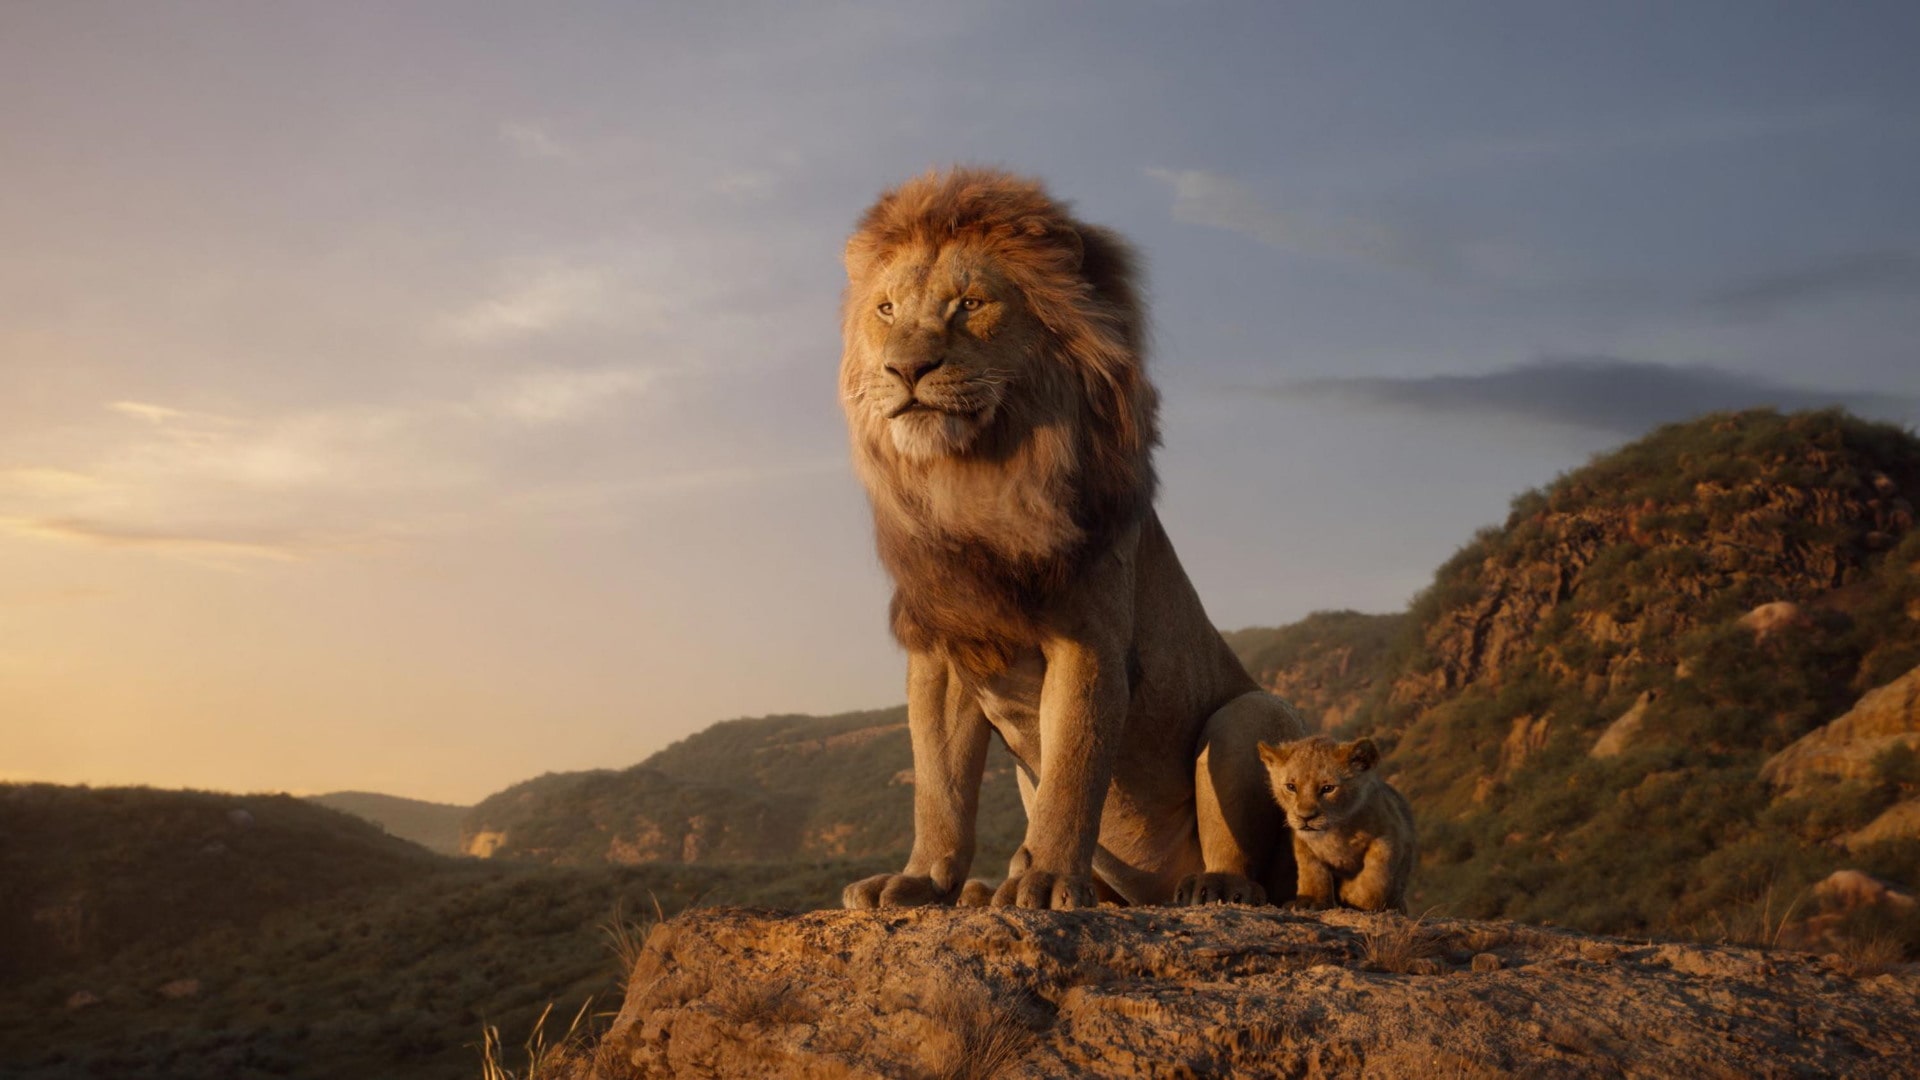 the lion king full movie online free no download